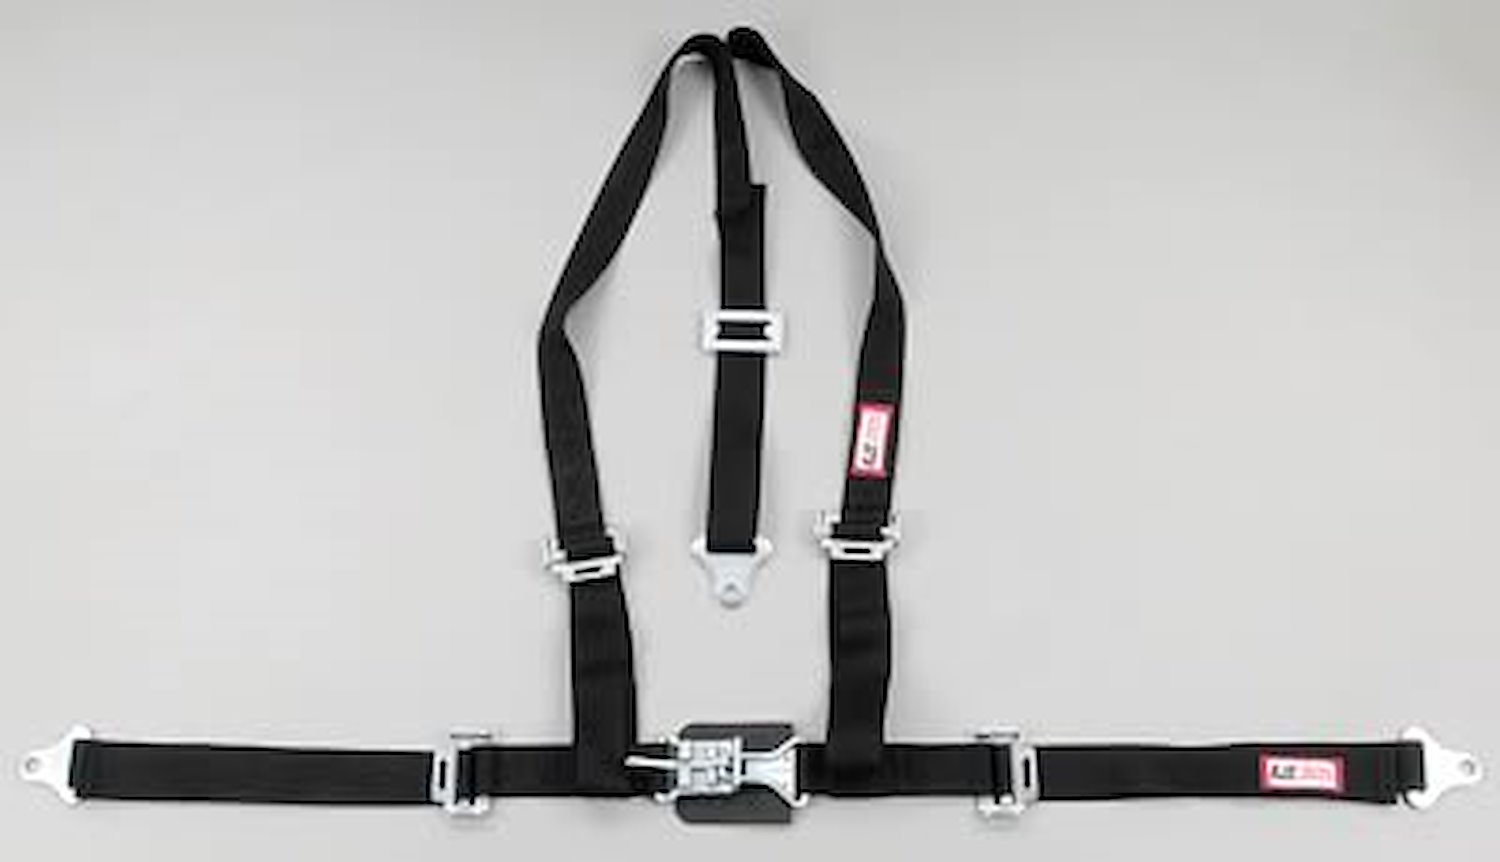 NON-SFI L&L HARNESS 2 PULL UP Lap Belt SEWN IN 2 S.H. V ROLL BAR Mount w/STERNUM STRAP ALL WRAP ENDS PURPLE